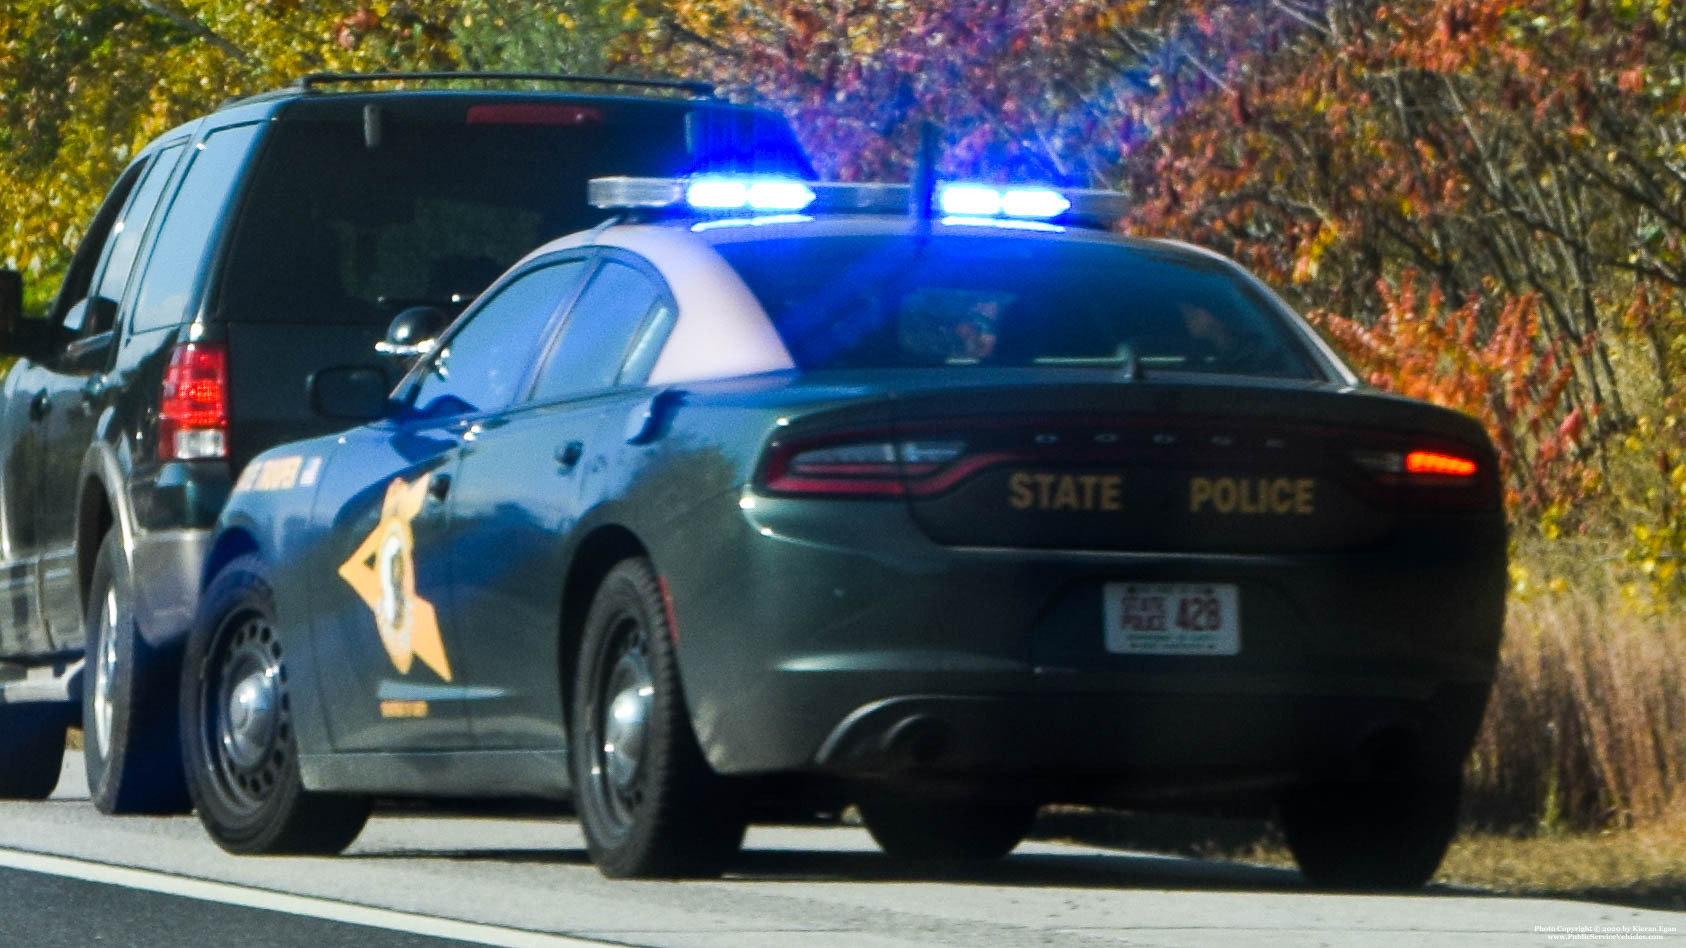 A photo  of New Hampshire State Police
            Cruiser 428, a 2015-2019 Dodge Charger             taken by Kieran Egan